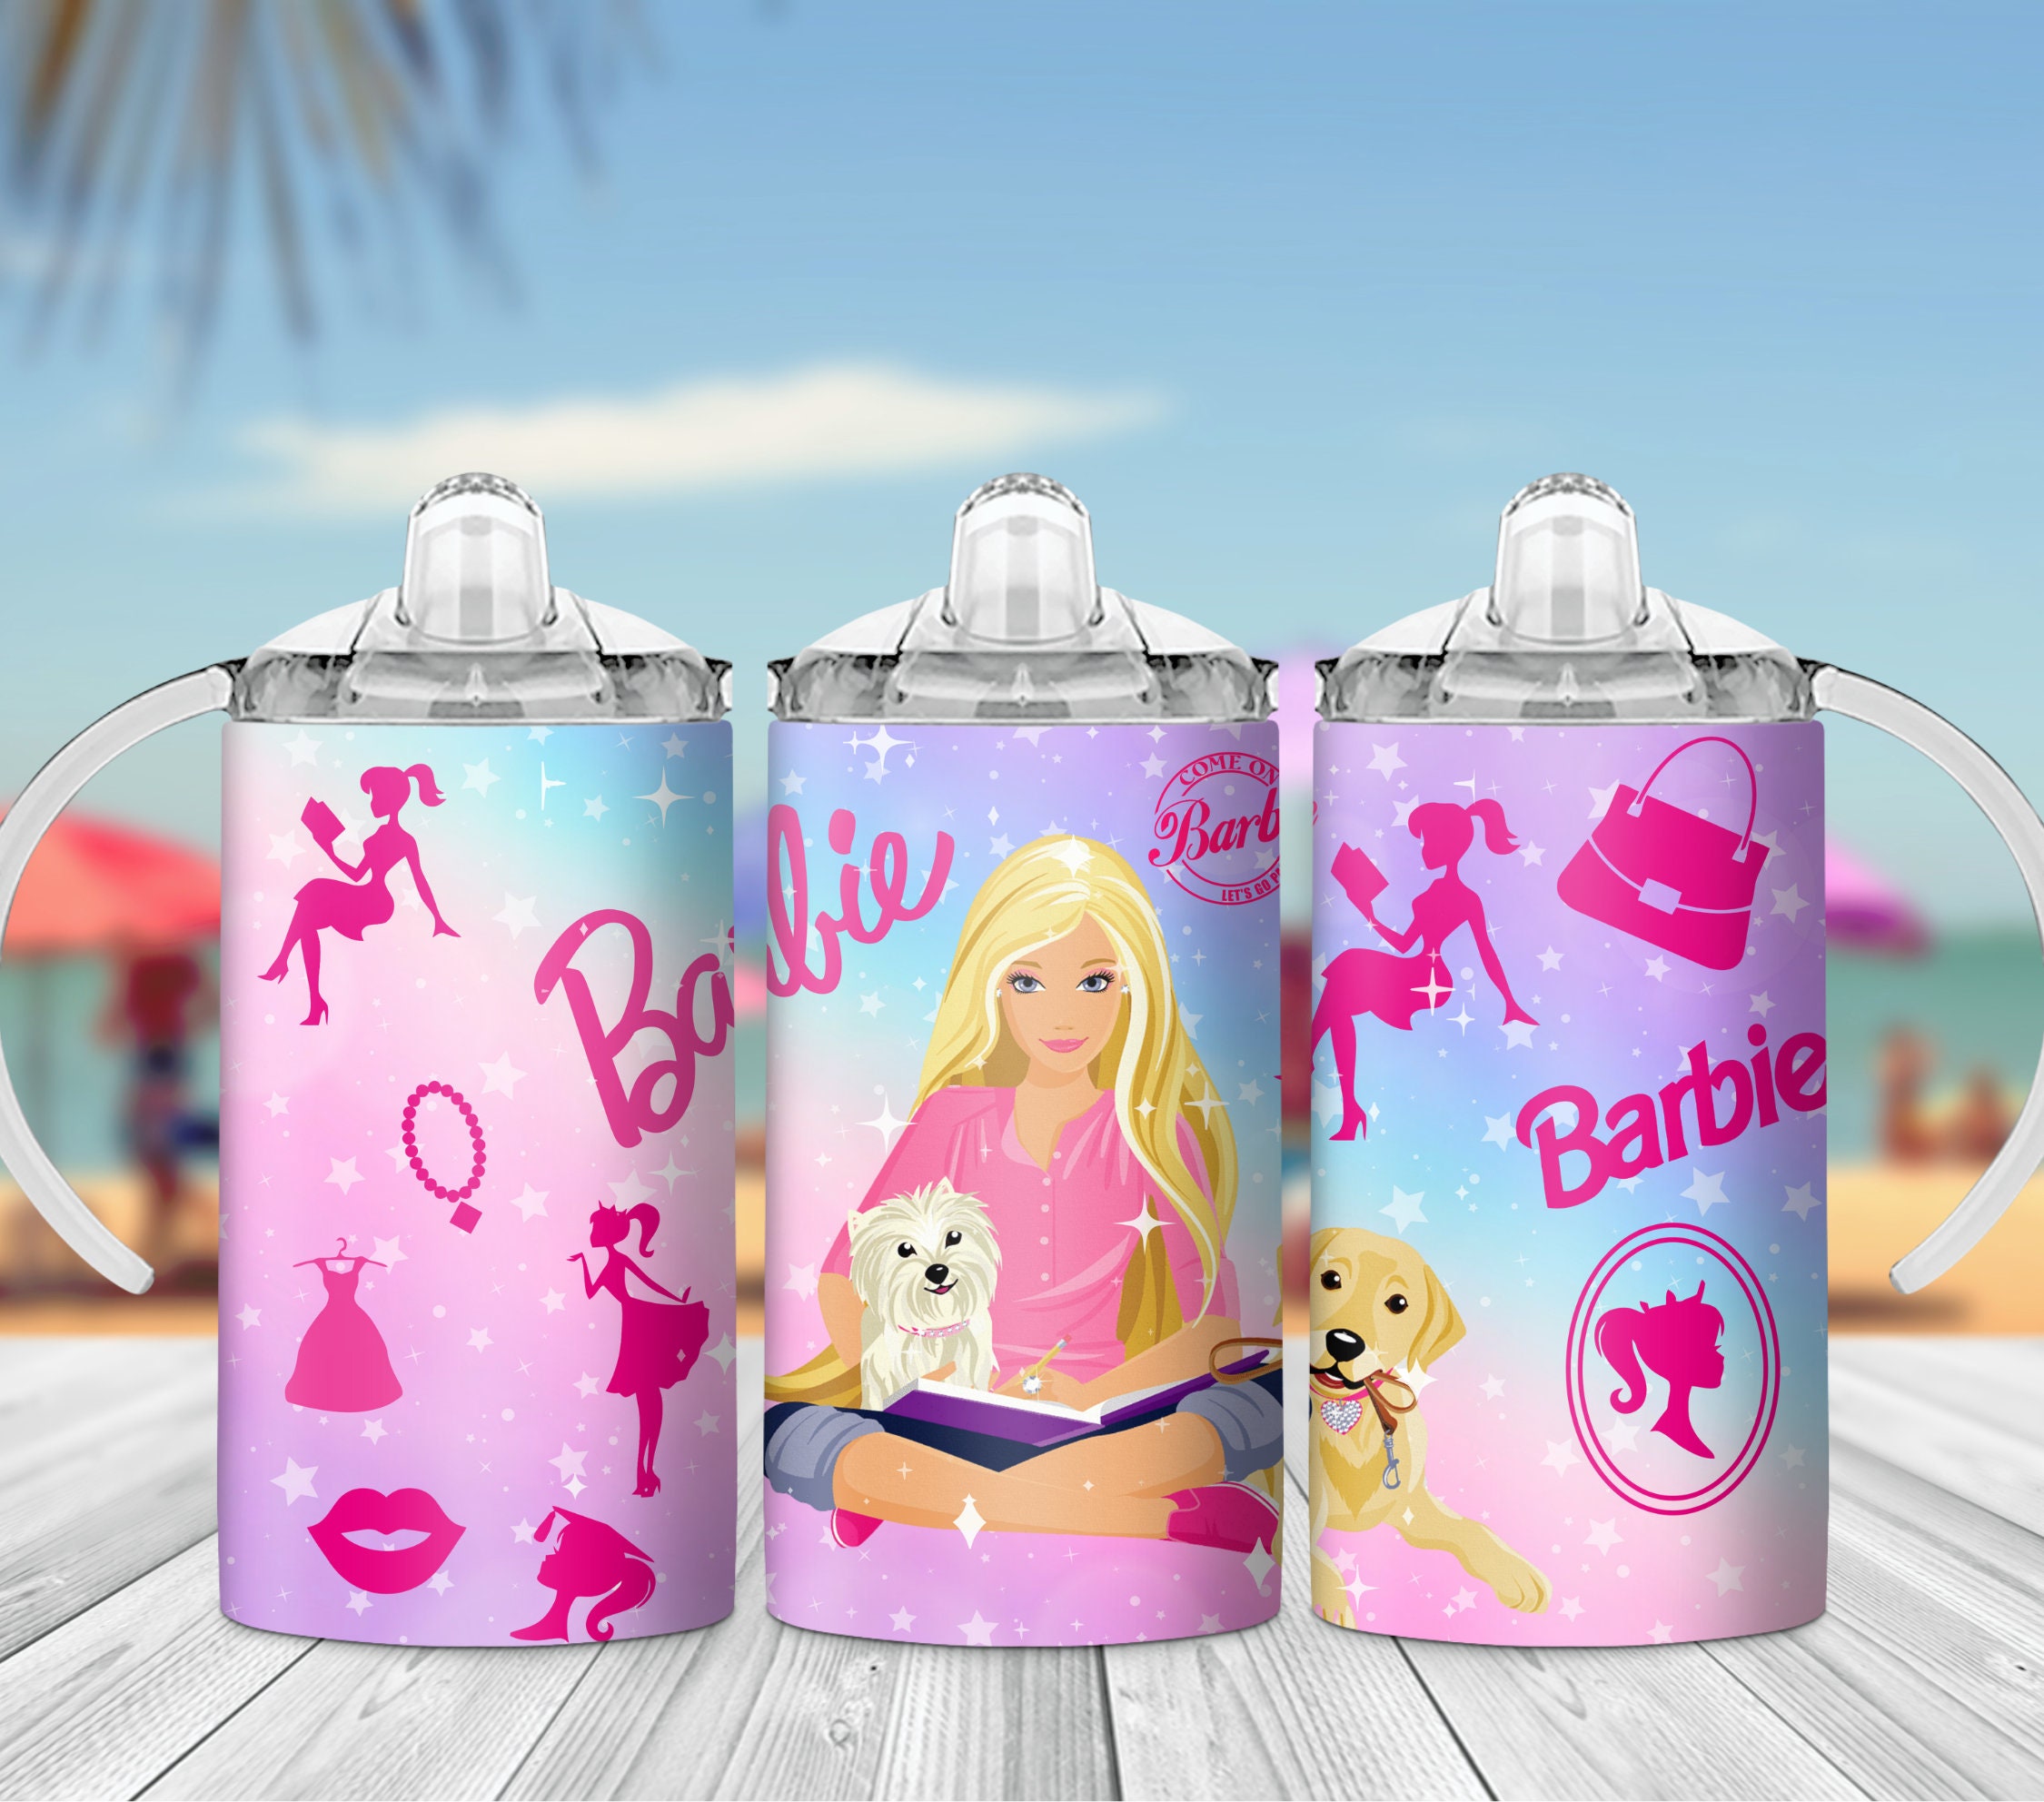 Barbie Pink 40oz Insulated Stainless Steel Cafe Engraved Tumblers With  Straw Portable Coffee Termos, Cupacuum Flasks, Water Bottles, And Handheld  Mugs From Yu5644, $11.31